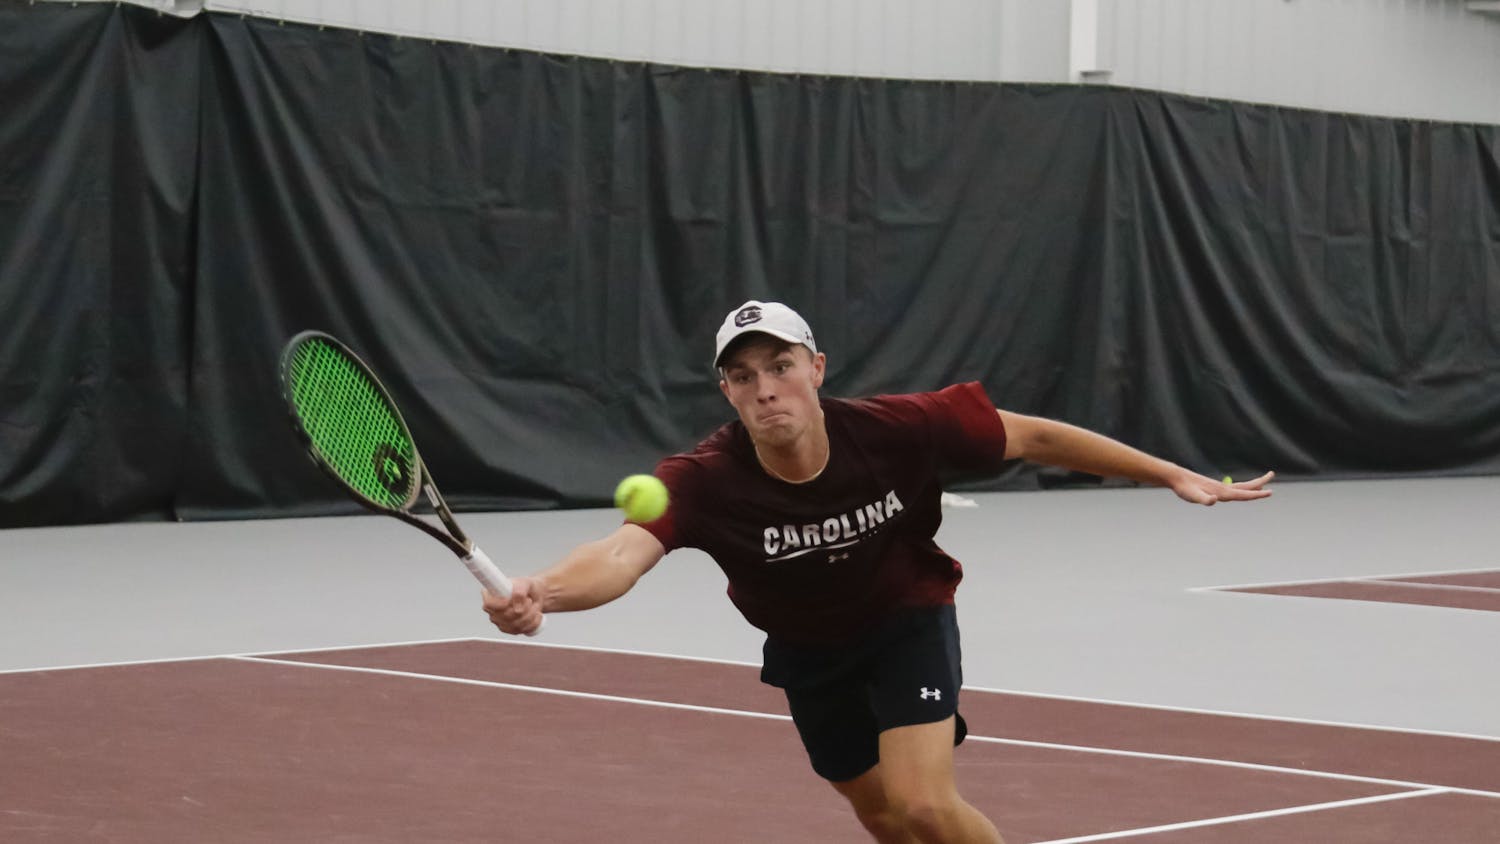 Junior James Story reaches for the ball during his doubles match at the ITA Kickoff Weekend event at the Carolina Indoor Tennis Center on Jan. 28, 2023. South Carolina beat Penn 4-0.